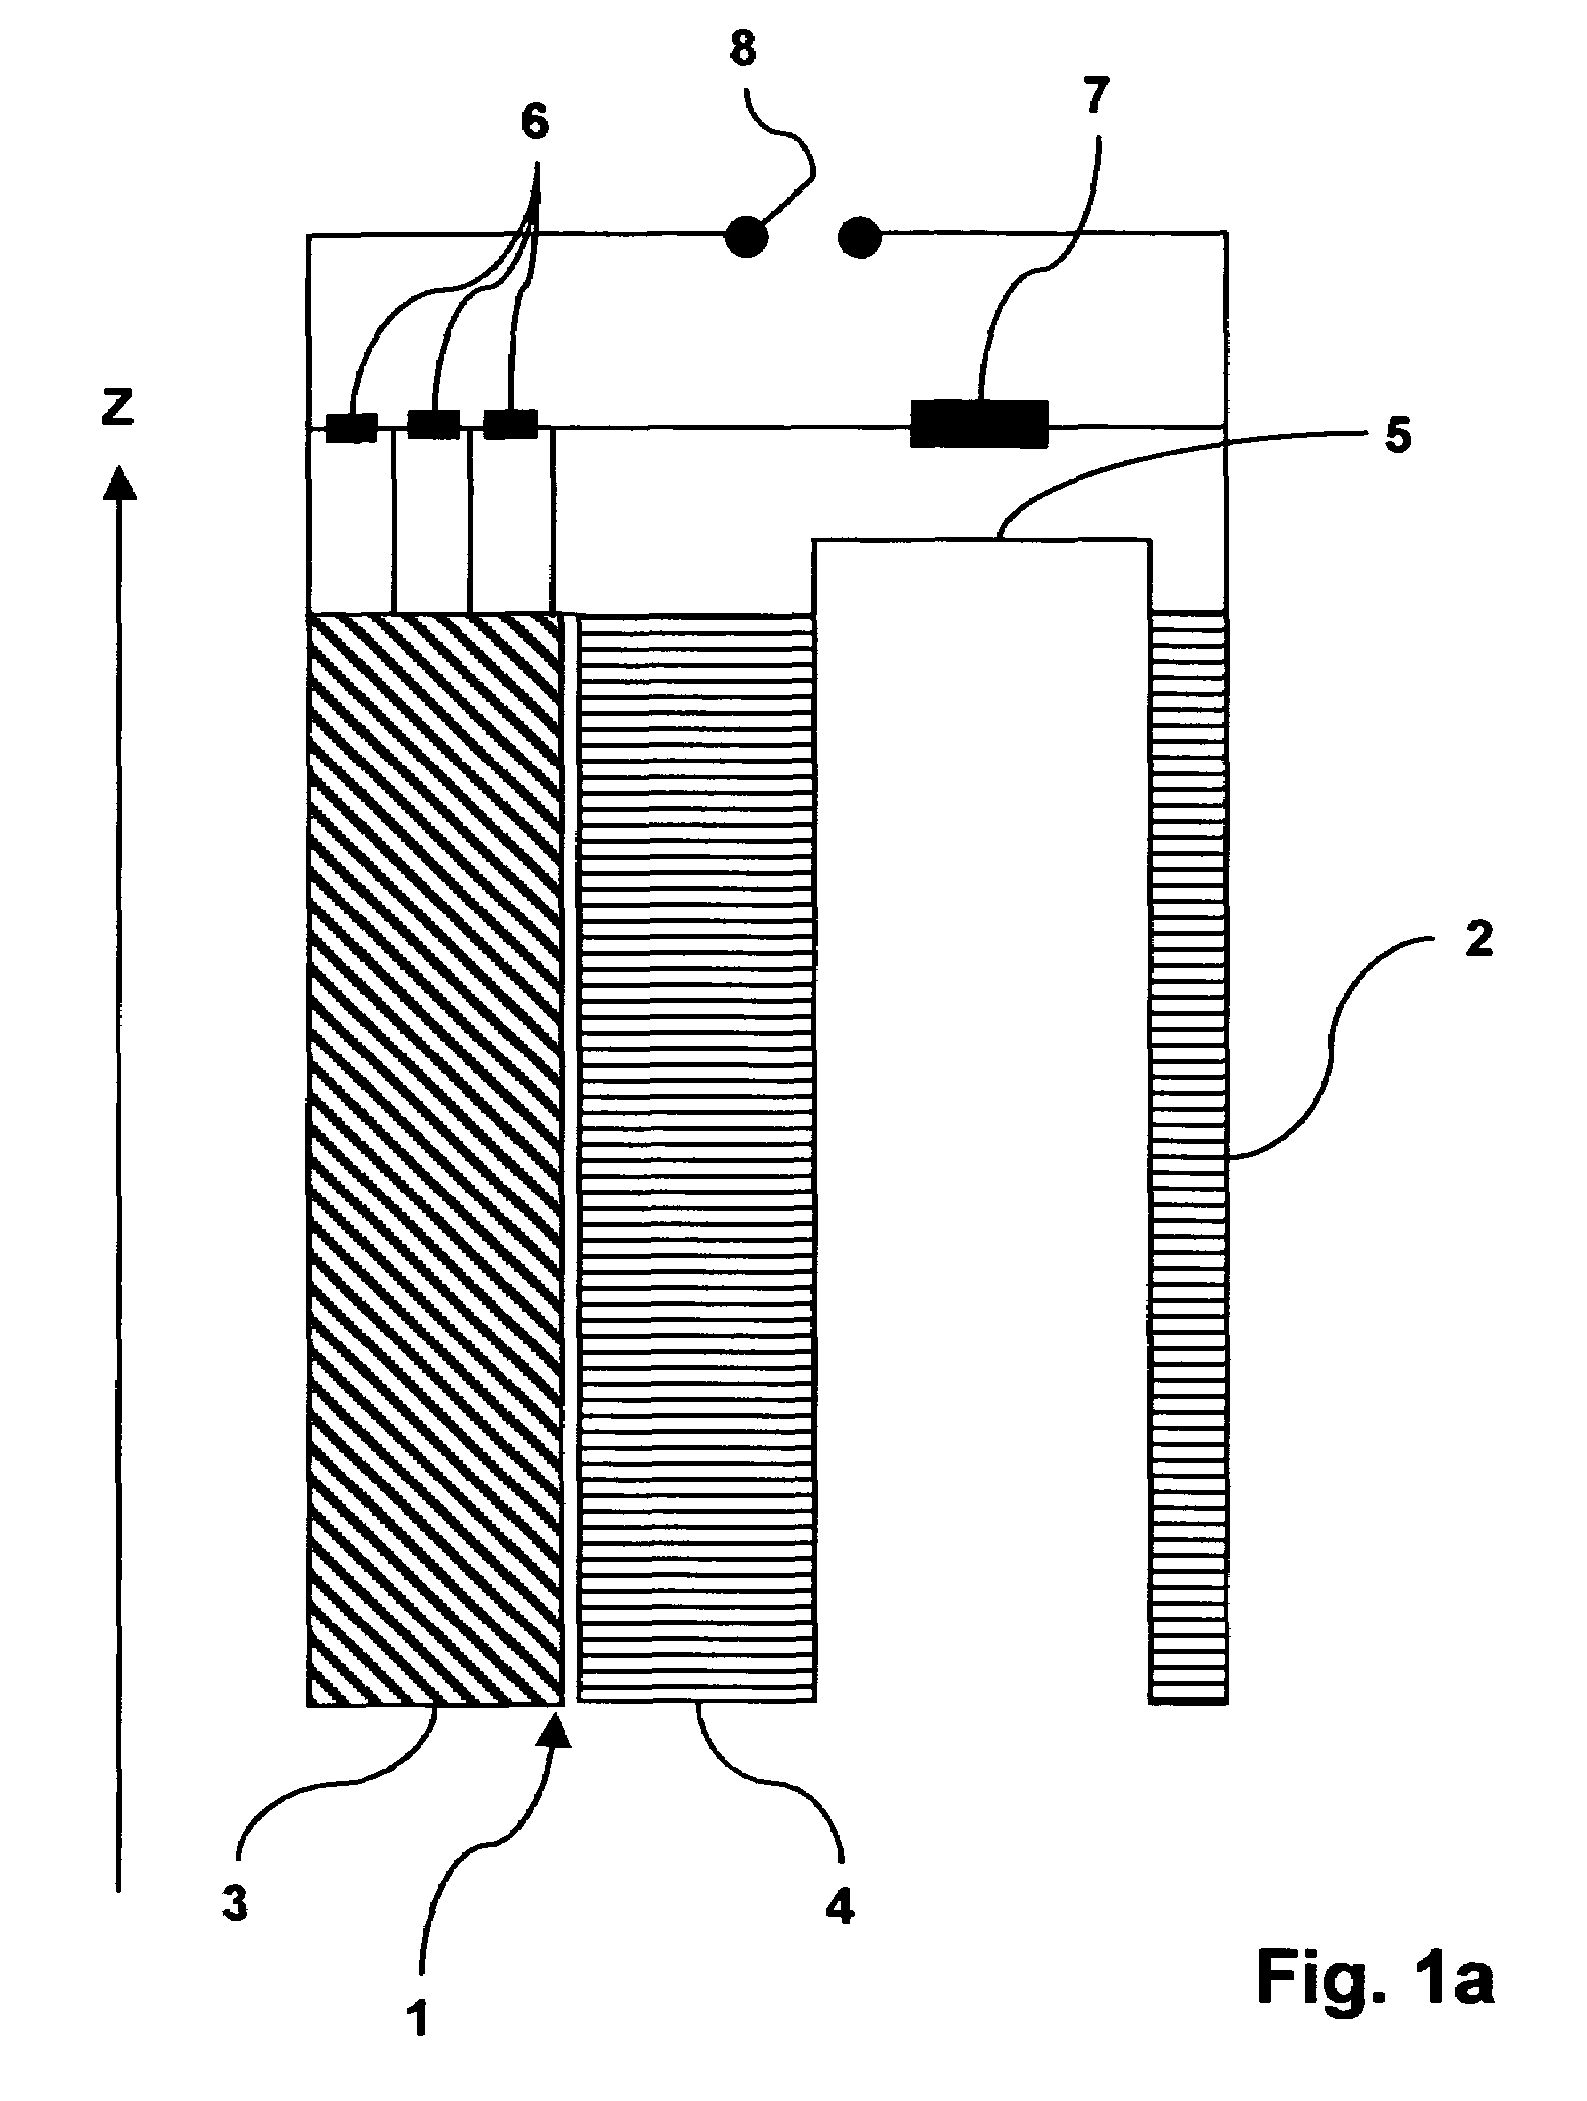 Superconducting magnet coil system with quench protection